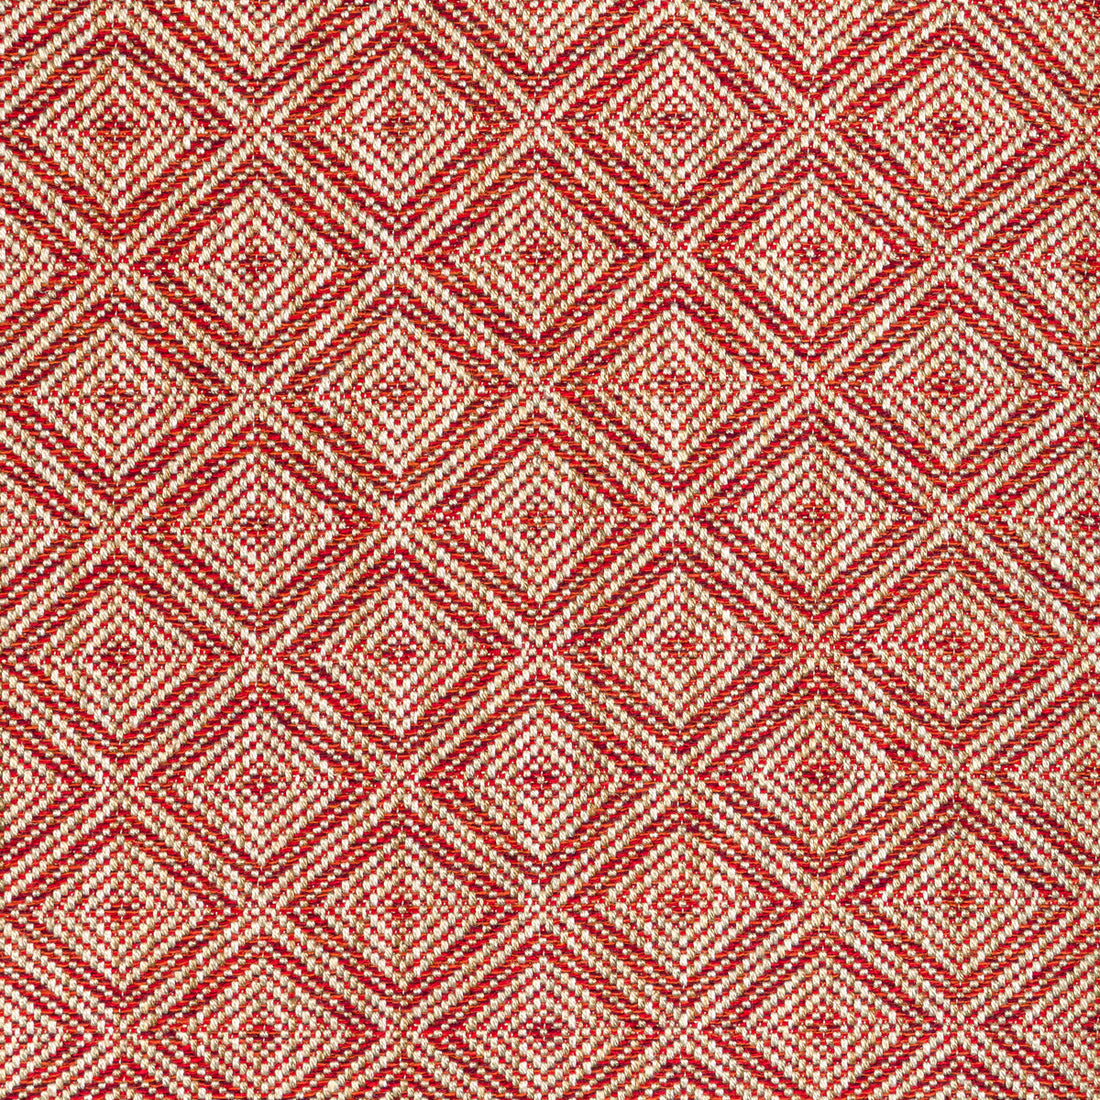 Calvin Weave fabric in red color - pattern 8022114.19.0 - by Brunschwig &amp; Fils in the Lorient Weaves collection